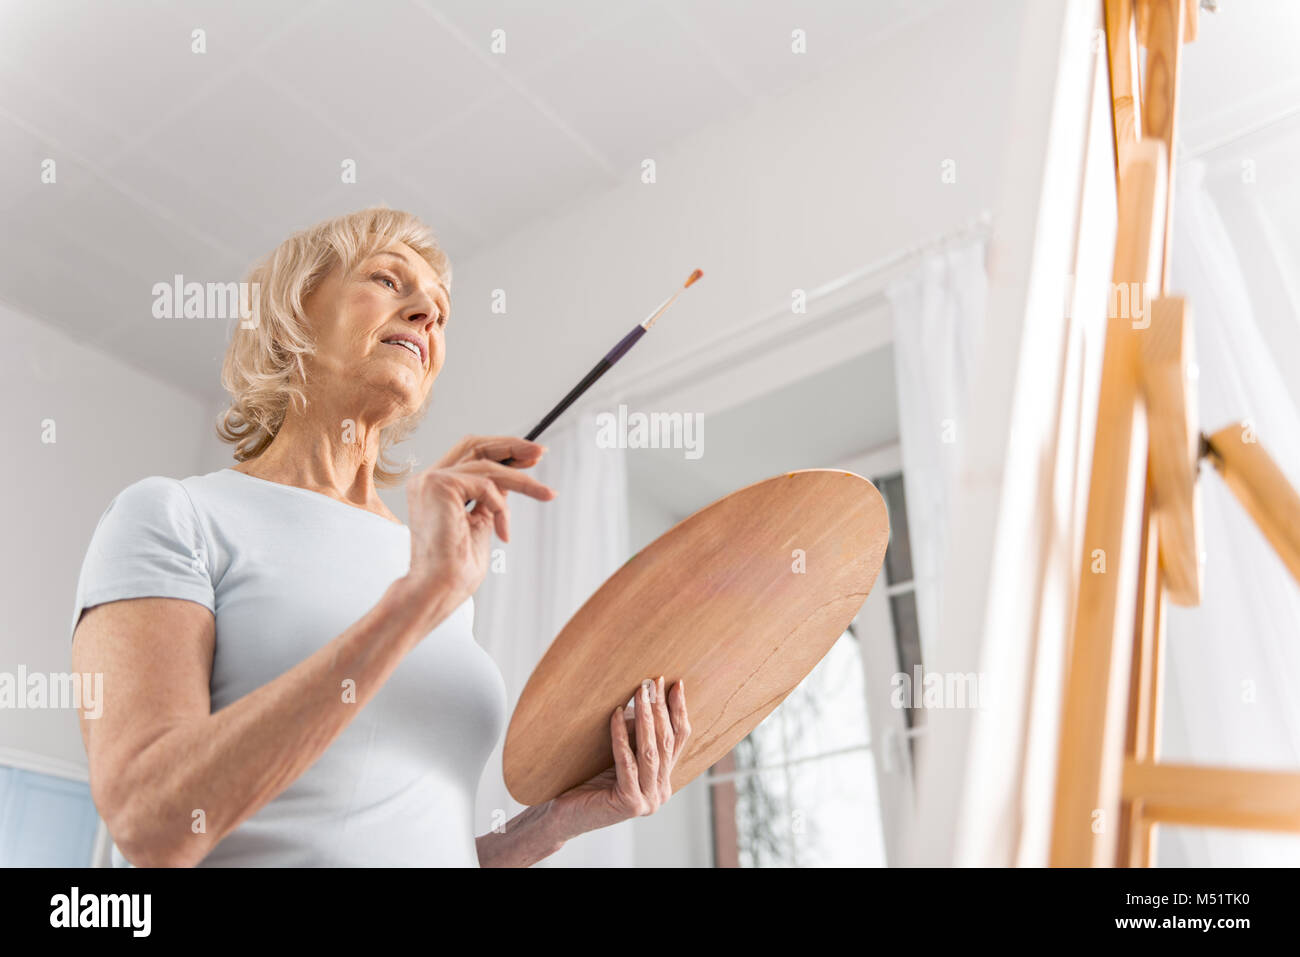 Dreamful mature woman coming up with idea Stock Photo